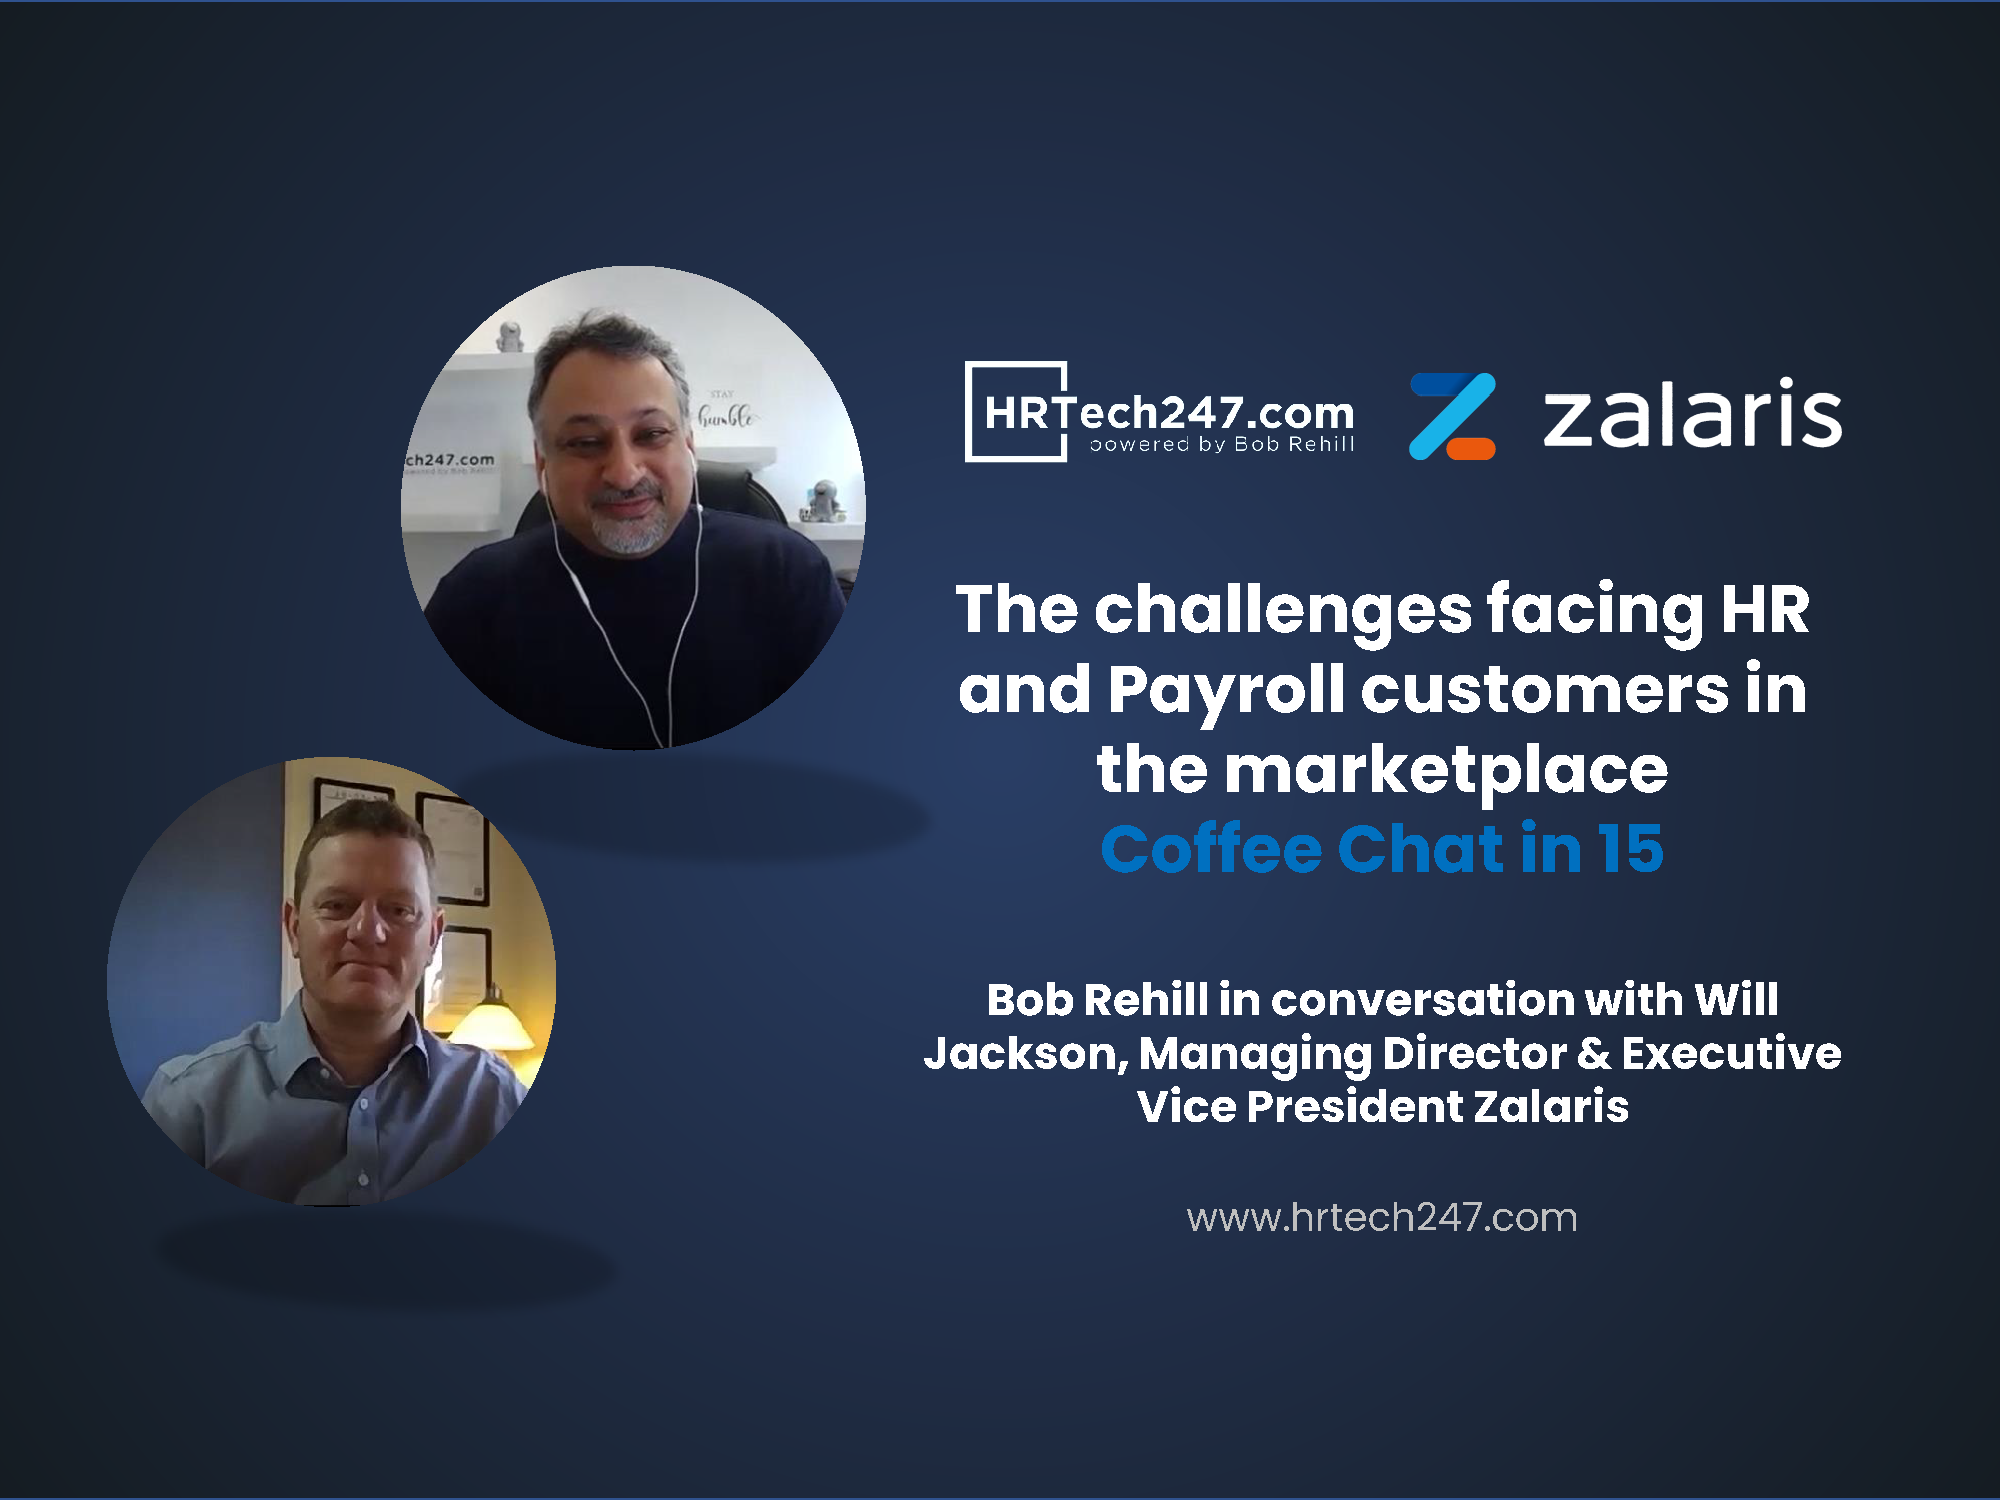 The challenges facing HR and Payroll customers in the marketplace